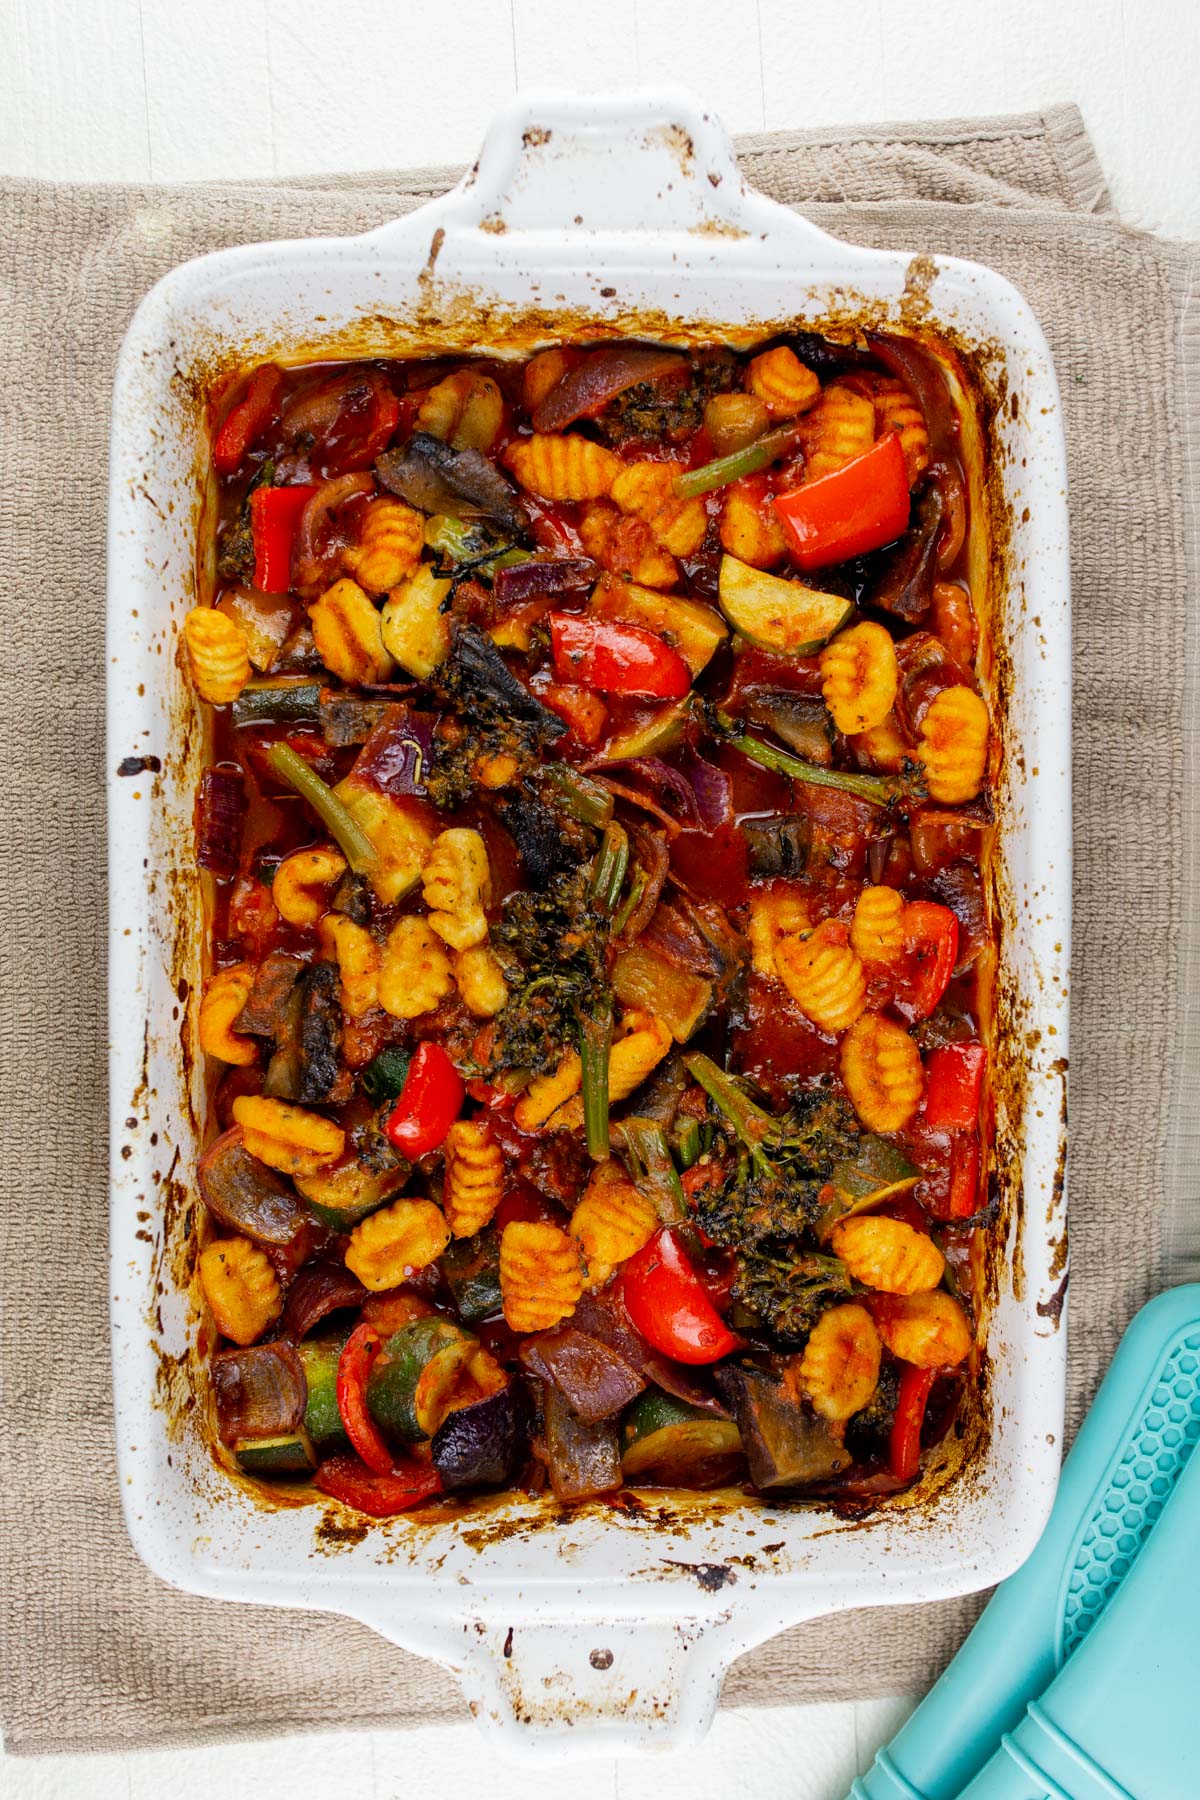 baked gnocchi with roasted vegetables and tomato sauce